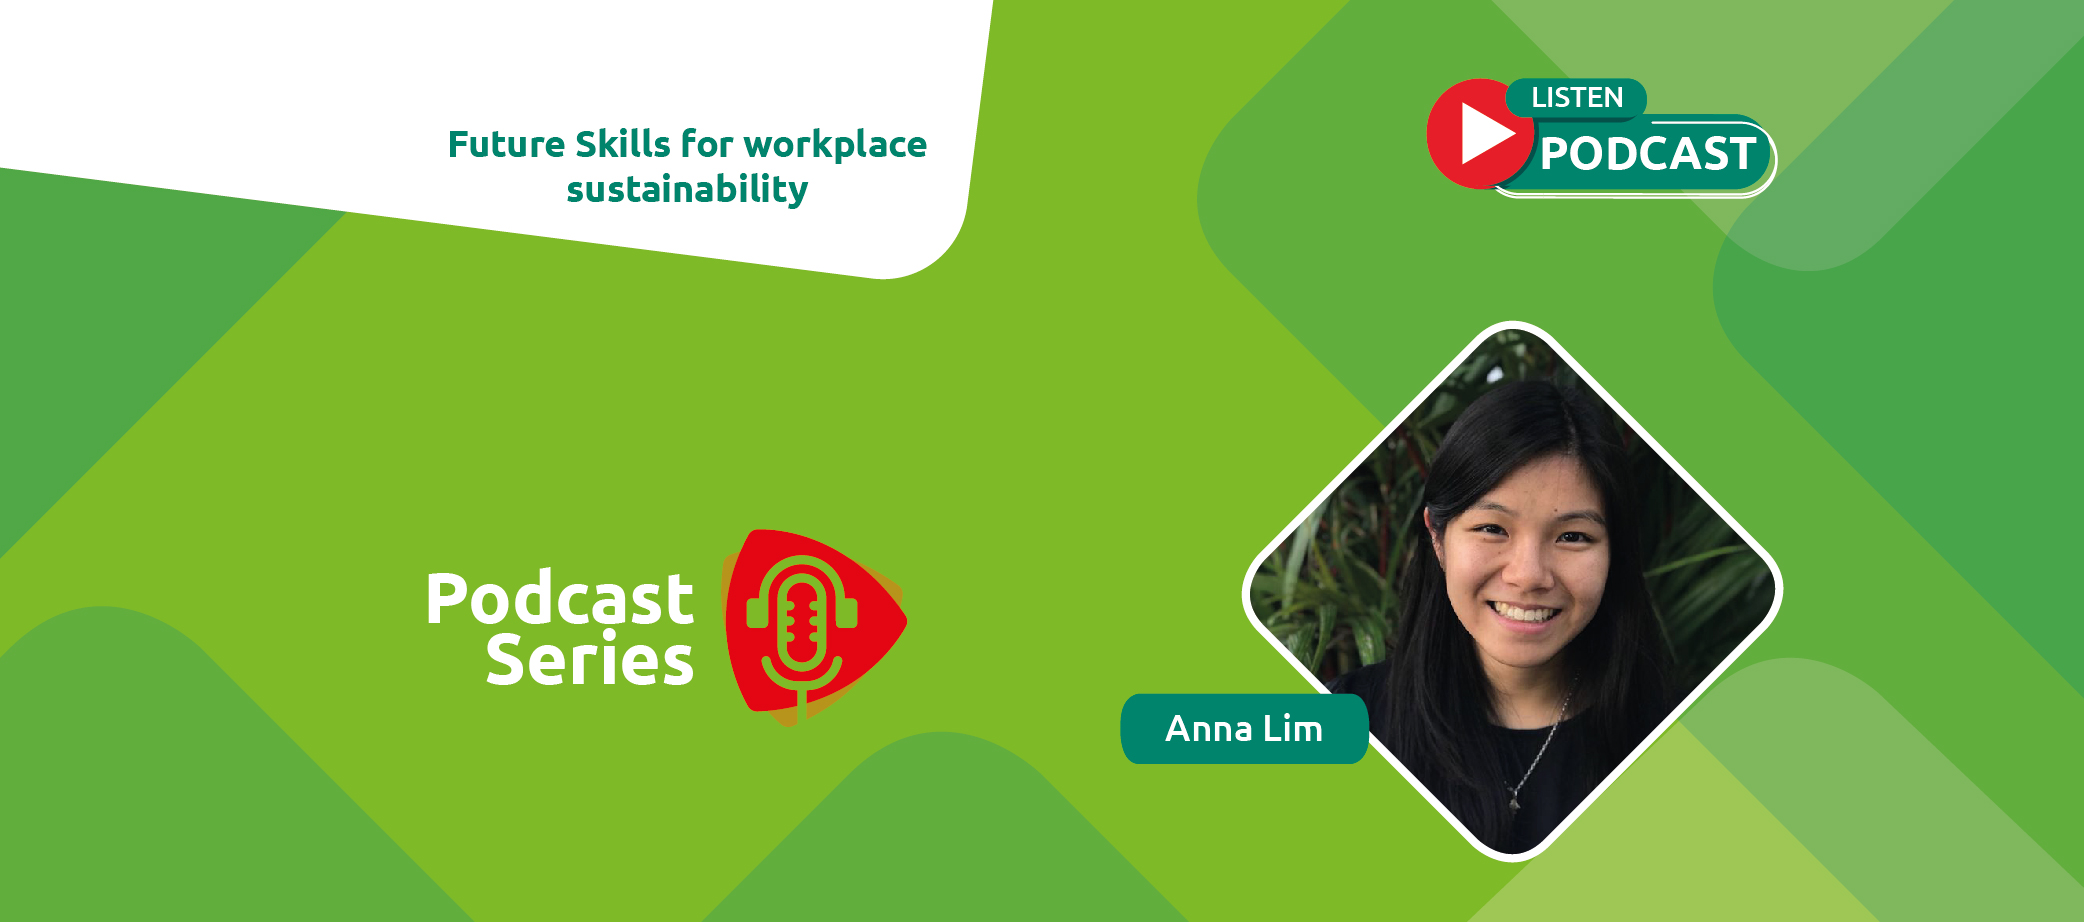 Anna Lim - Future Skills for Workplace Sustainability.